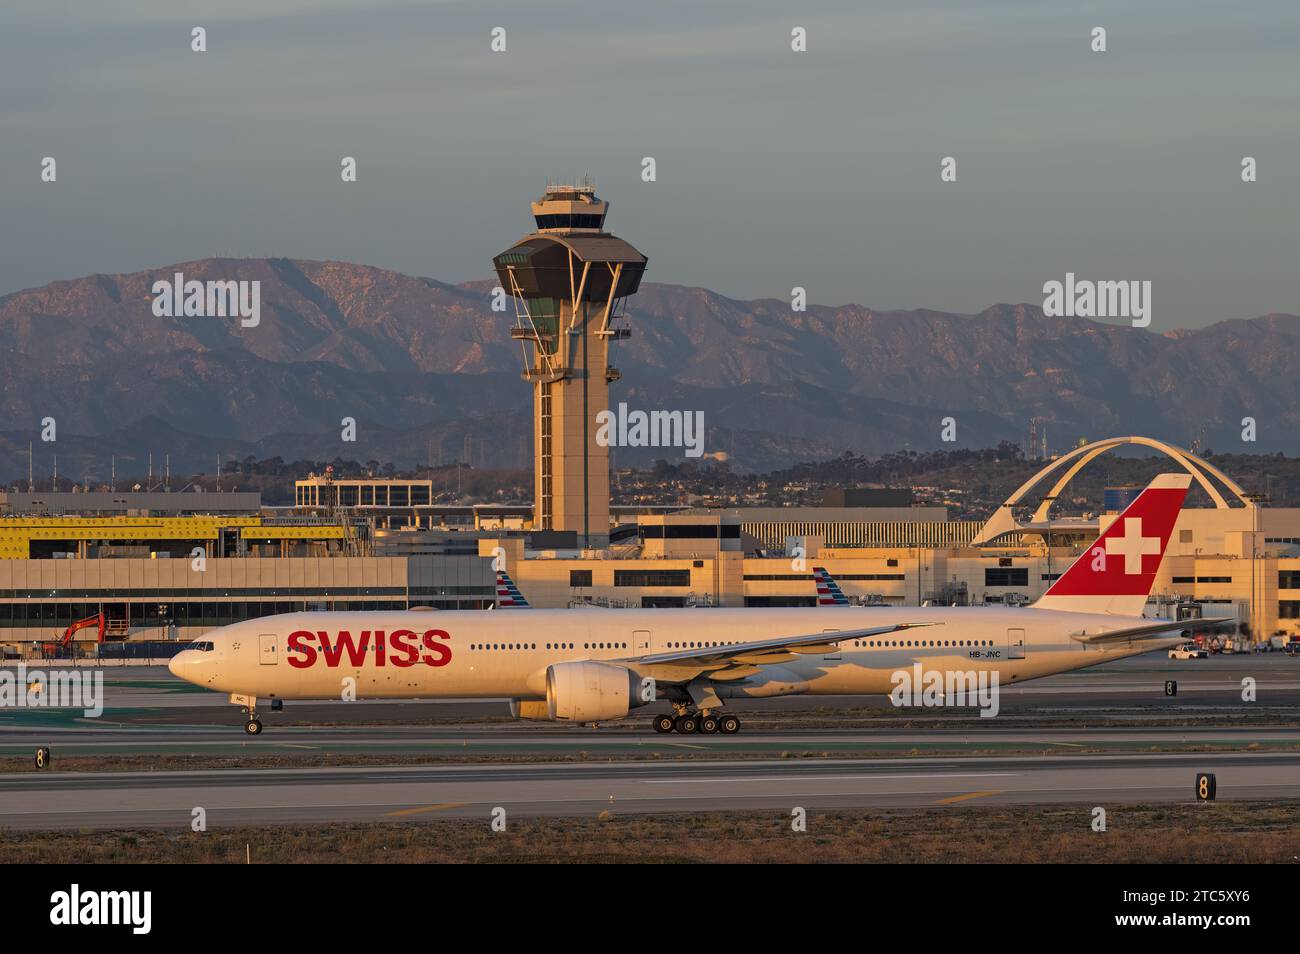 Swiss International Air Lines Boeing 777-3DE(ER) with registration HB-JNC shown taxiing after landing at LAX, Los Angeles International Airport. Stock Photo